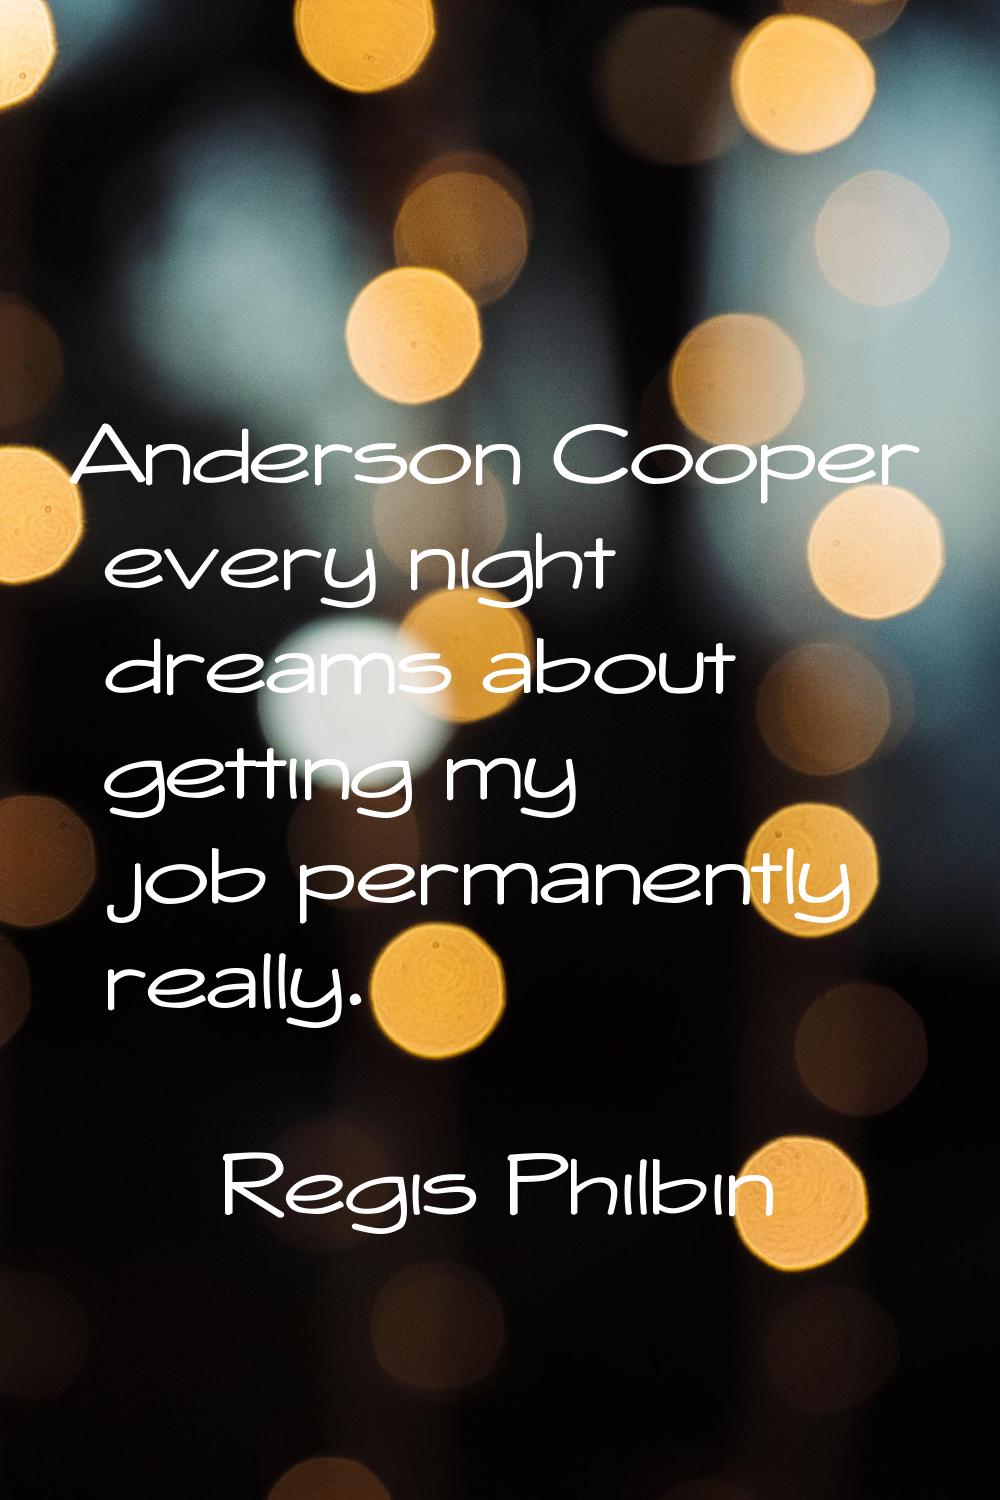 Anderson Cooper every night dreams about getting my job permanently really.